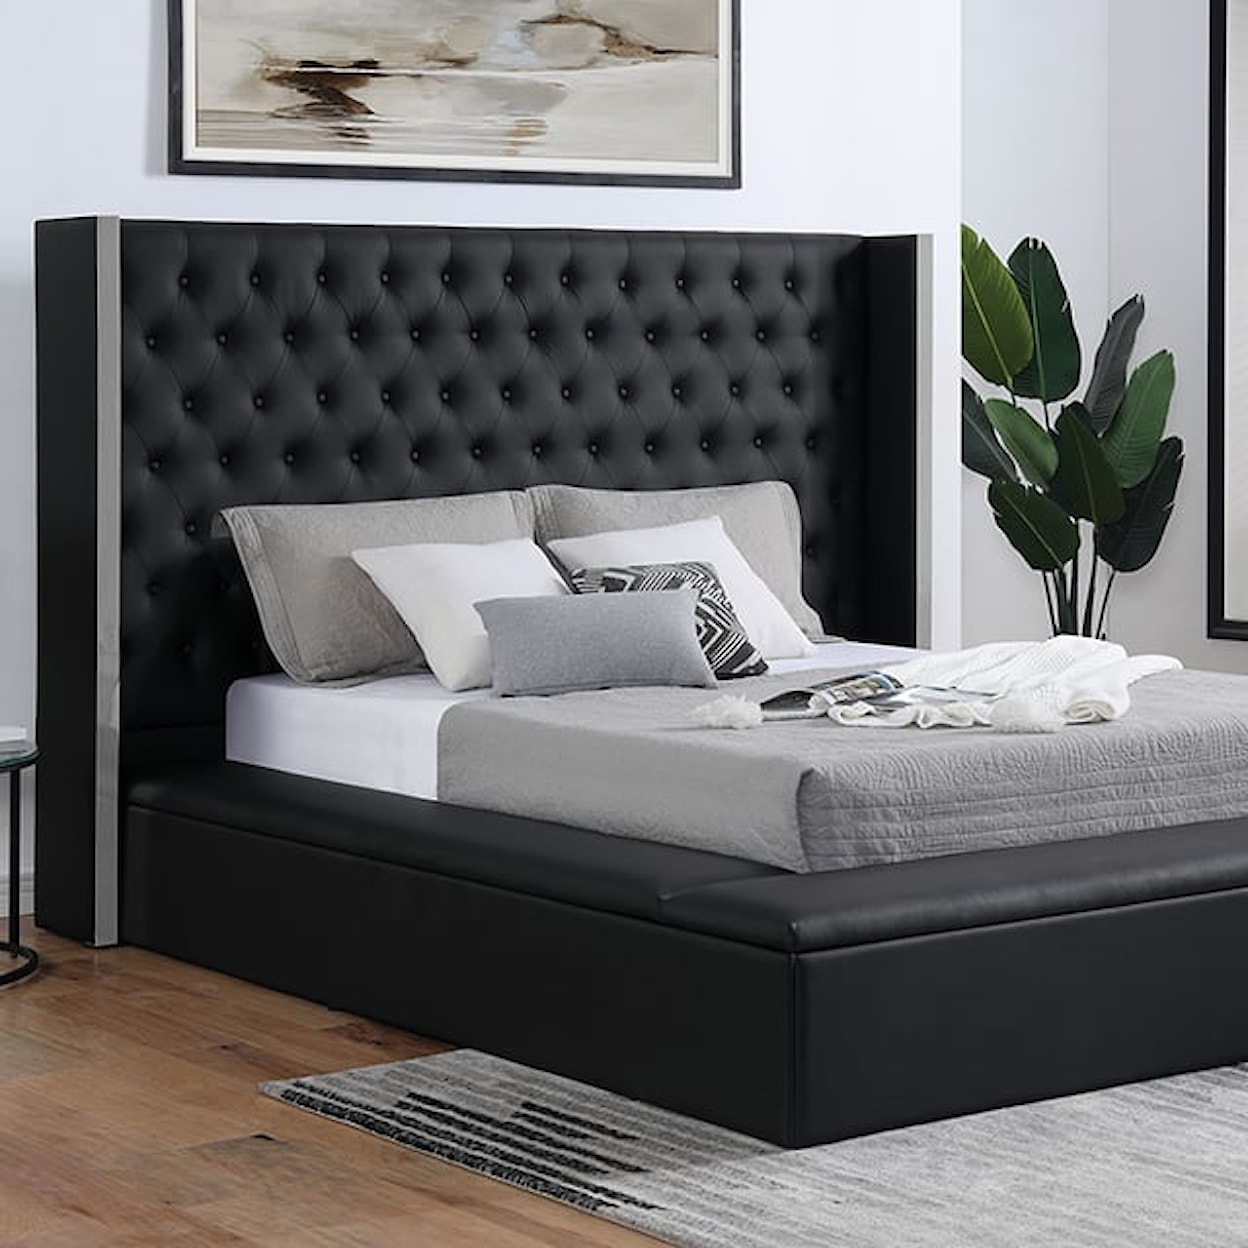 Furniture of America - FOA Eudora Upholstered Queen Bed